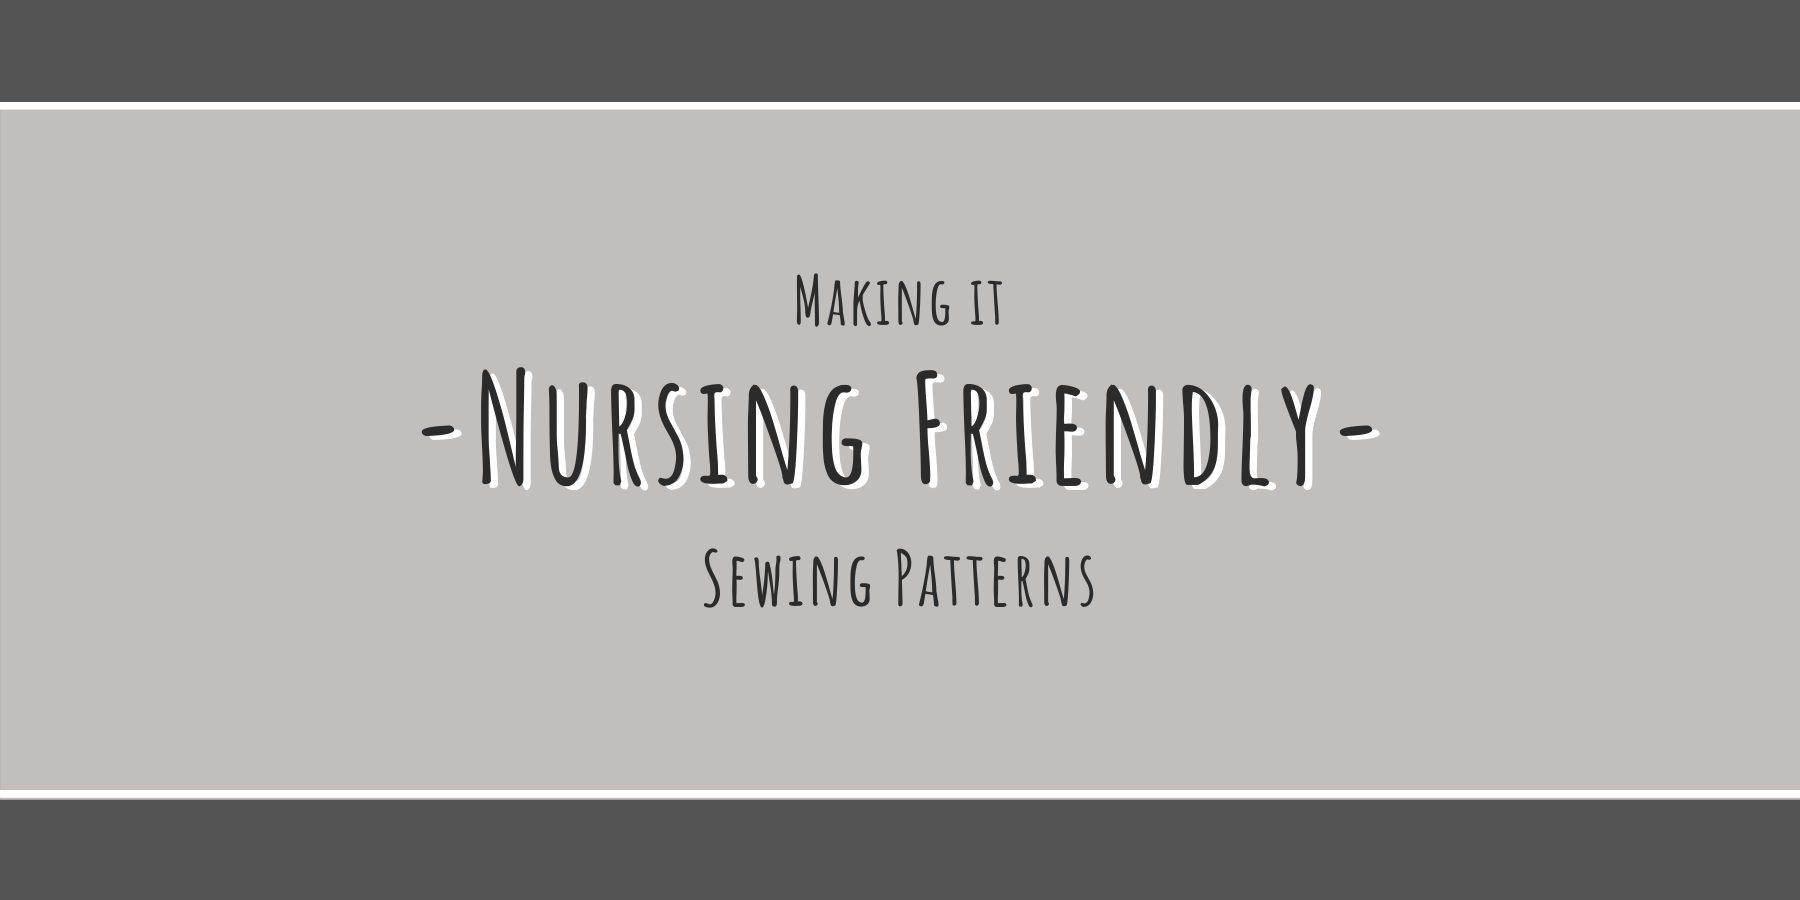 60+ nursing friendly sewing patterns - Swoodson Says